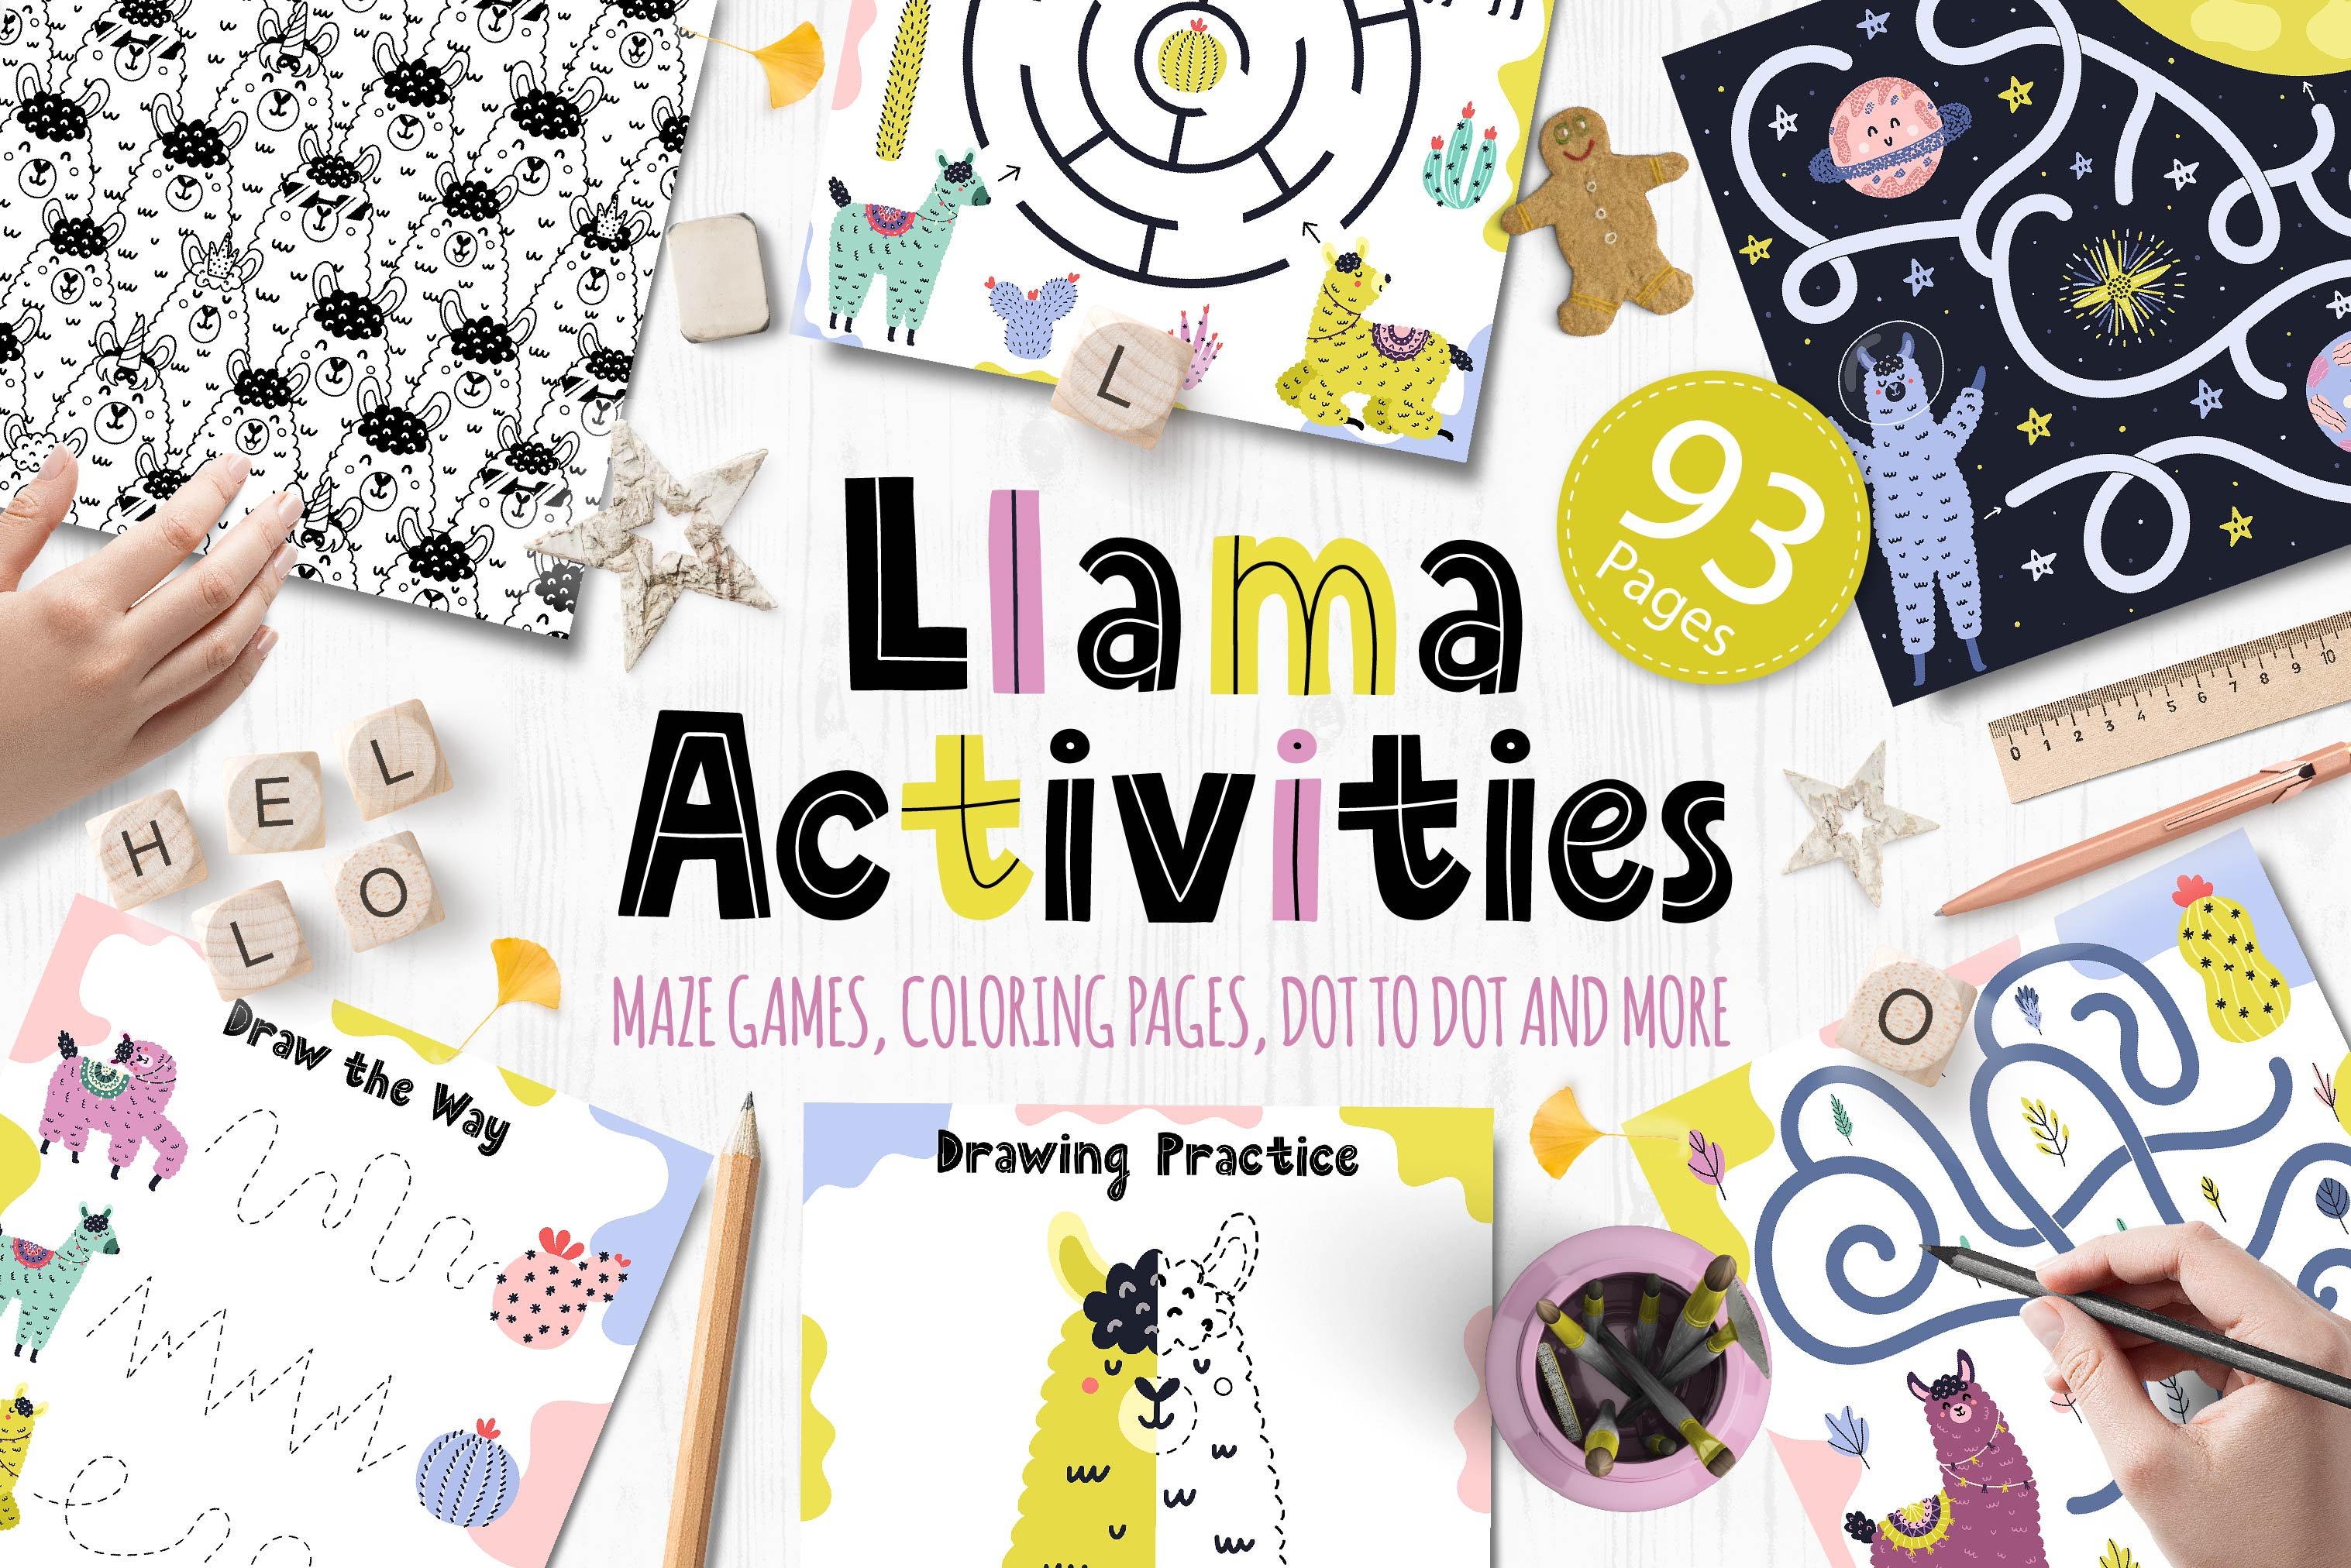 Llama Activities Collection cover image.